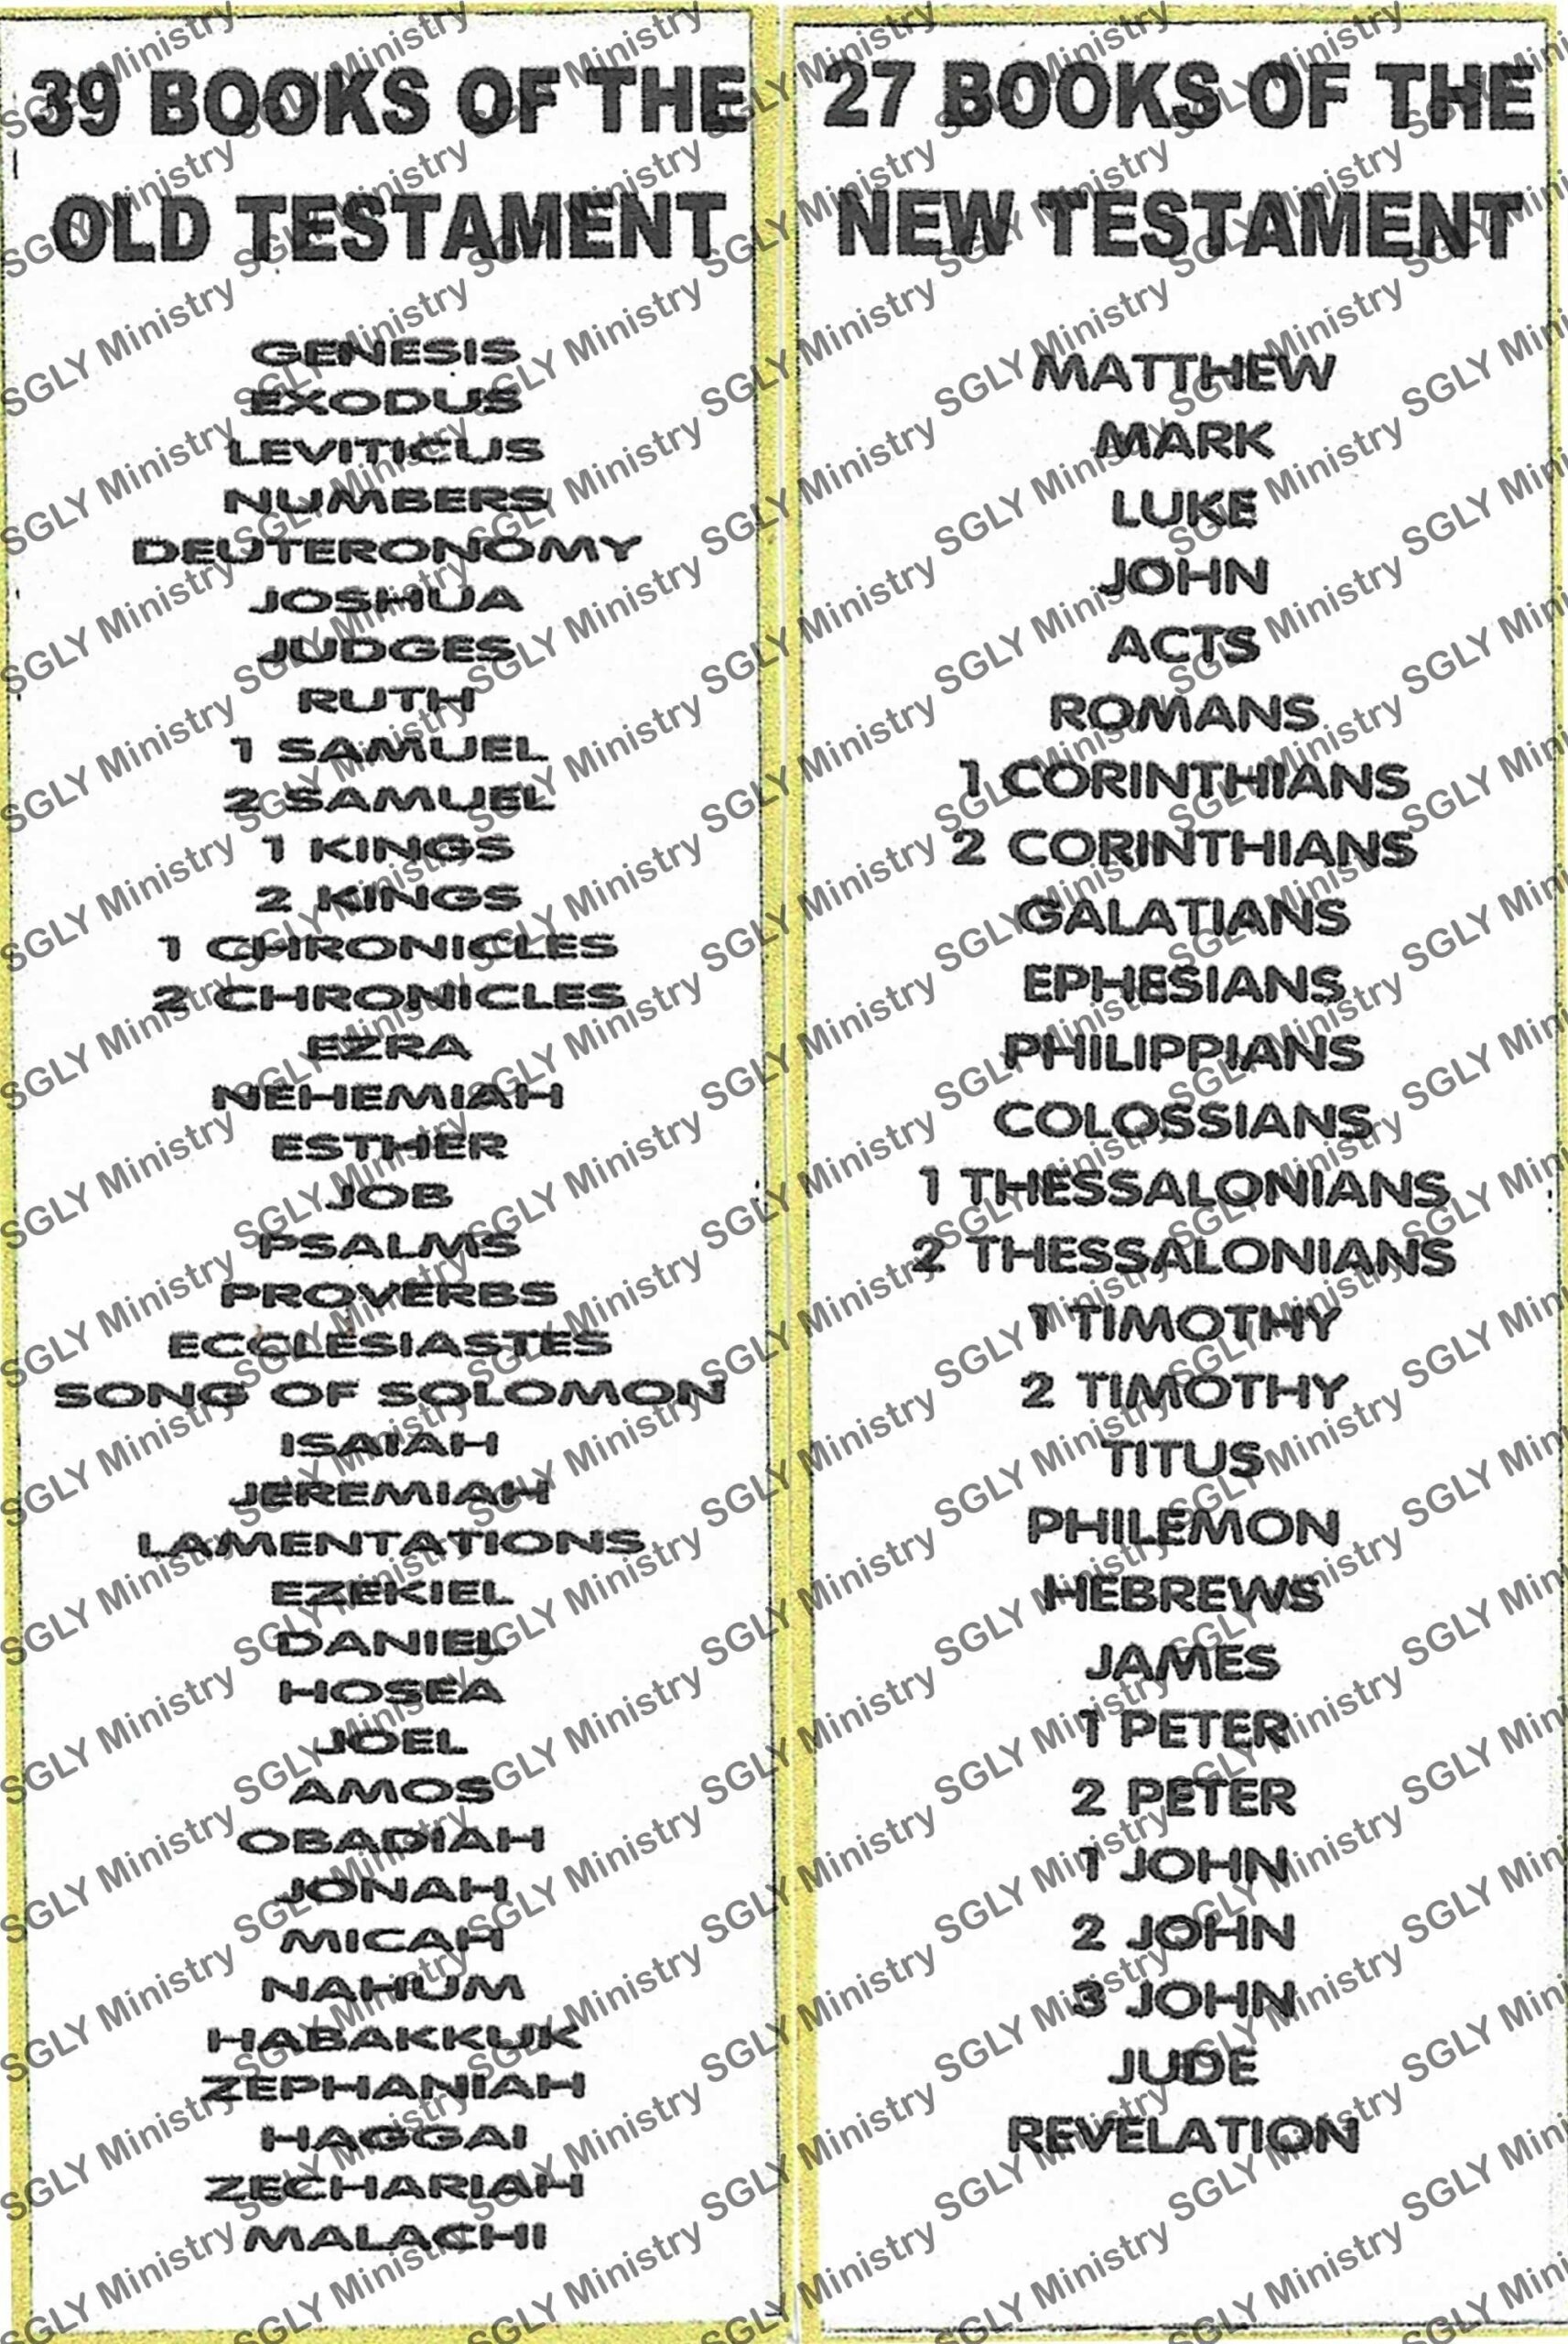 Books Of The Bible Bookmarks 10 Printable Bookmarks Digital Download Etsy